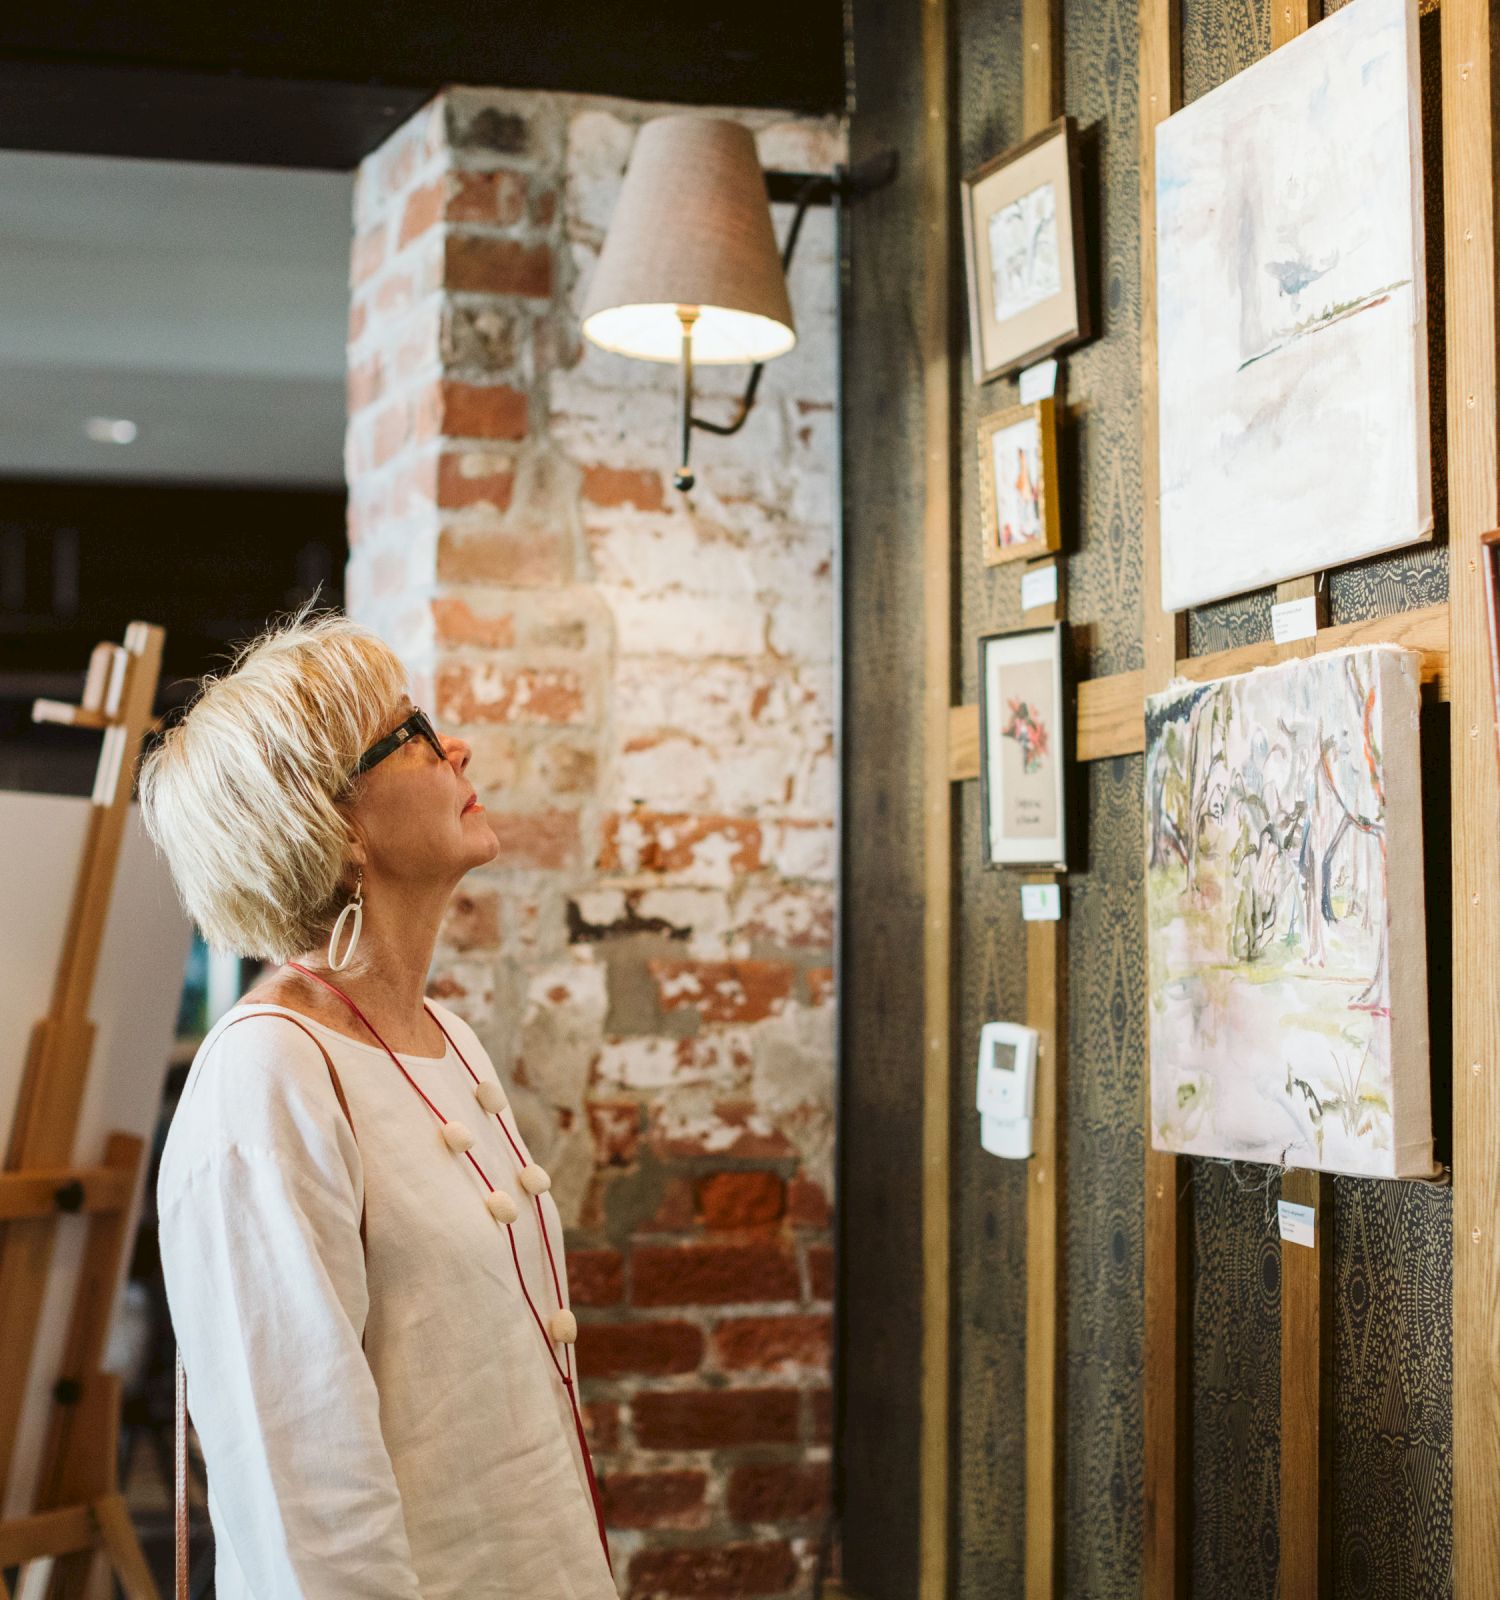 A person with short blonde hair and glasses is looking at framed artworks on a wall in a rustic-themed gallery or café.